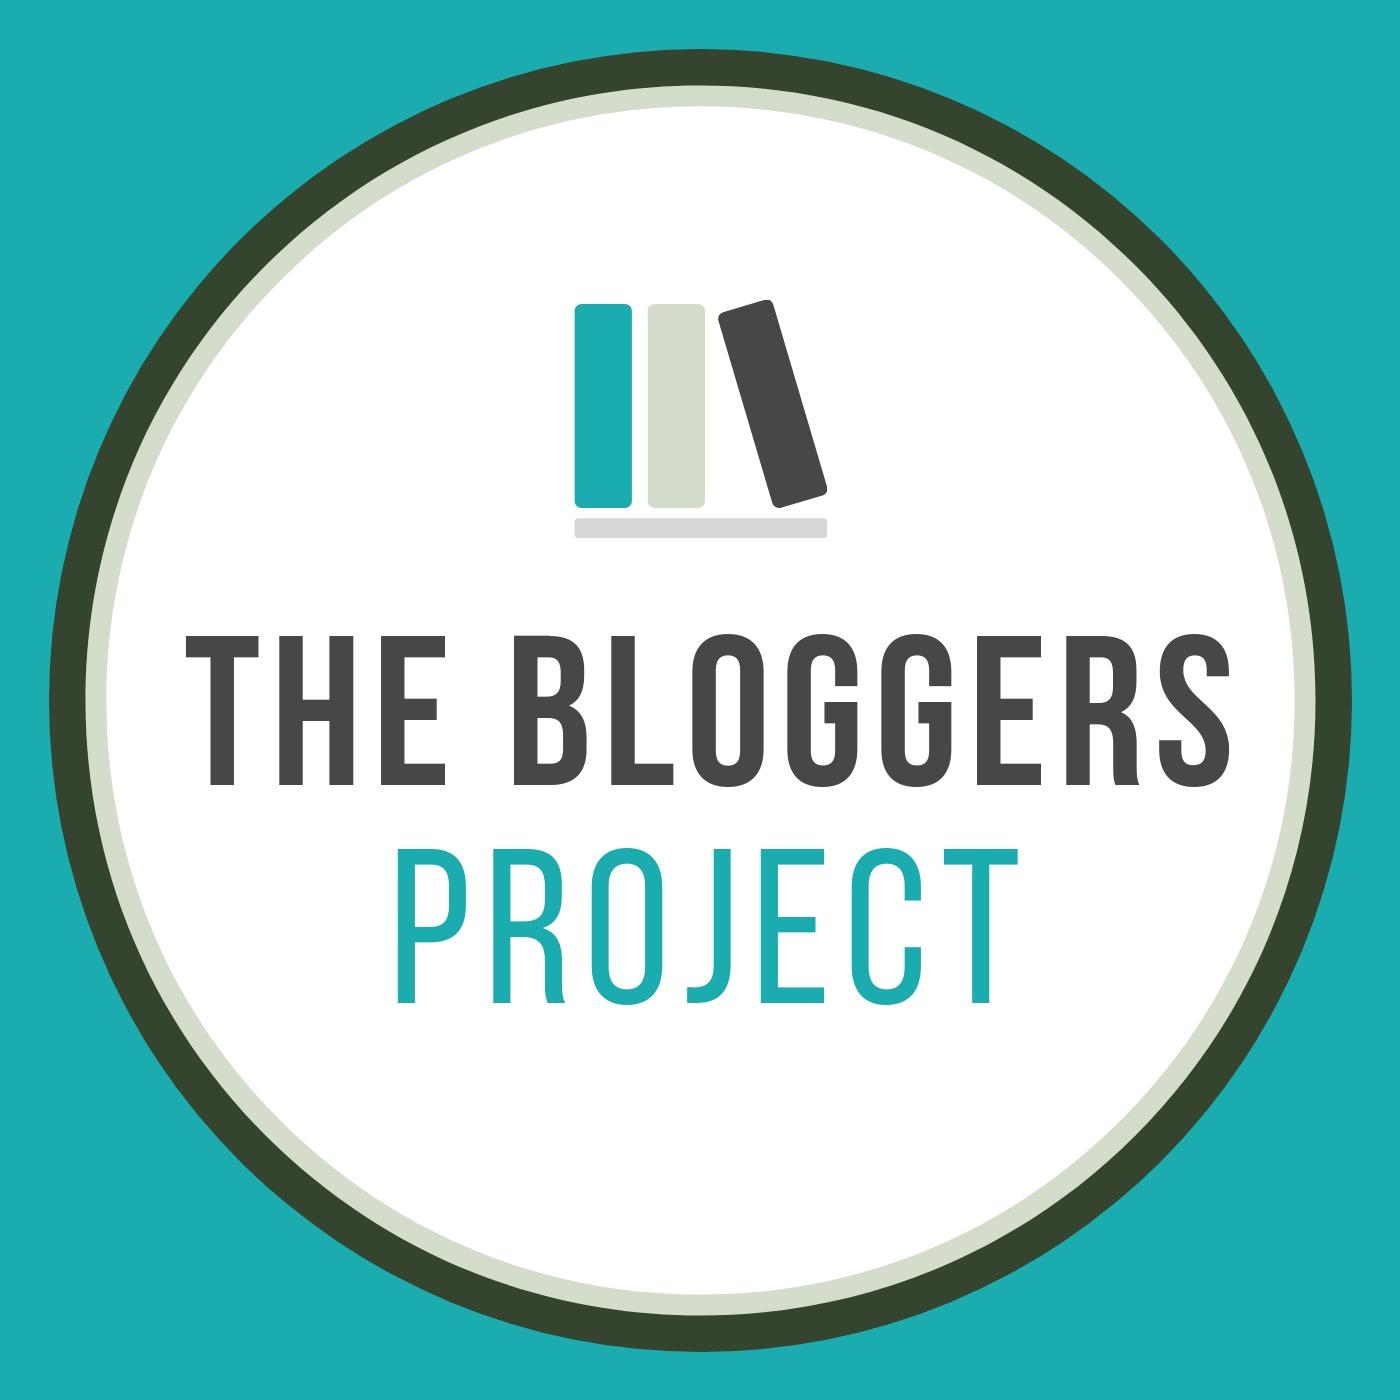 The Bloggers Project